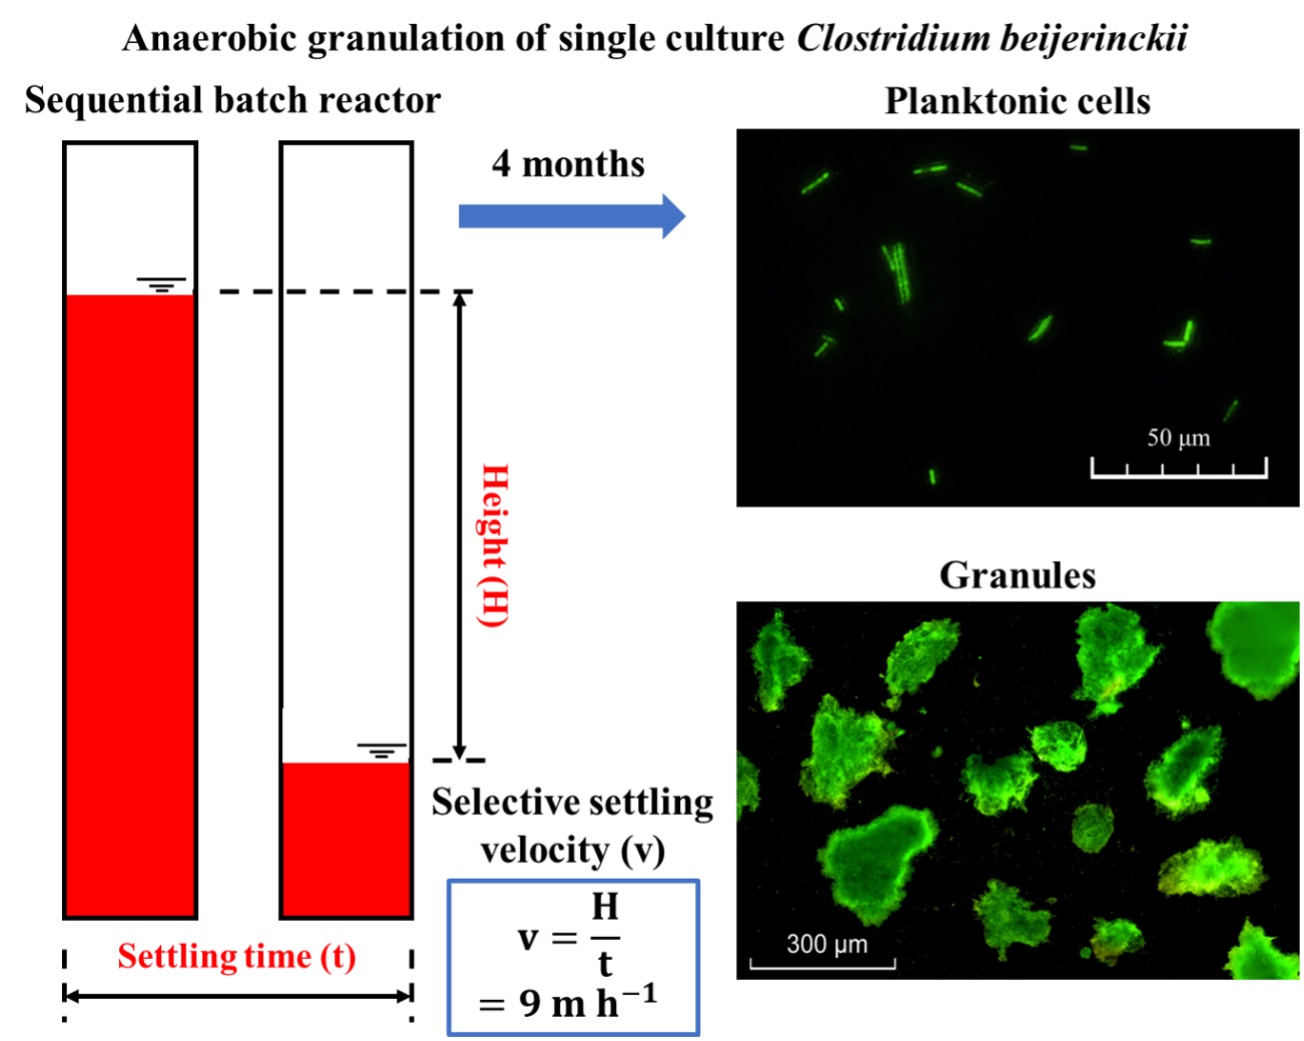 9/23/2021 Congratulation to Zhaohui and Xueyao for their new publication in Food and Bioproducts Processing about single culture biogranulation!